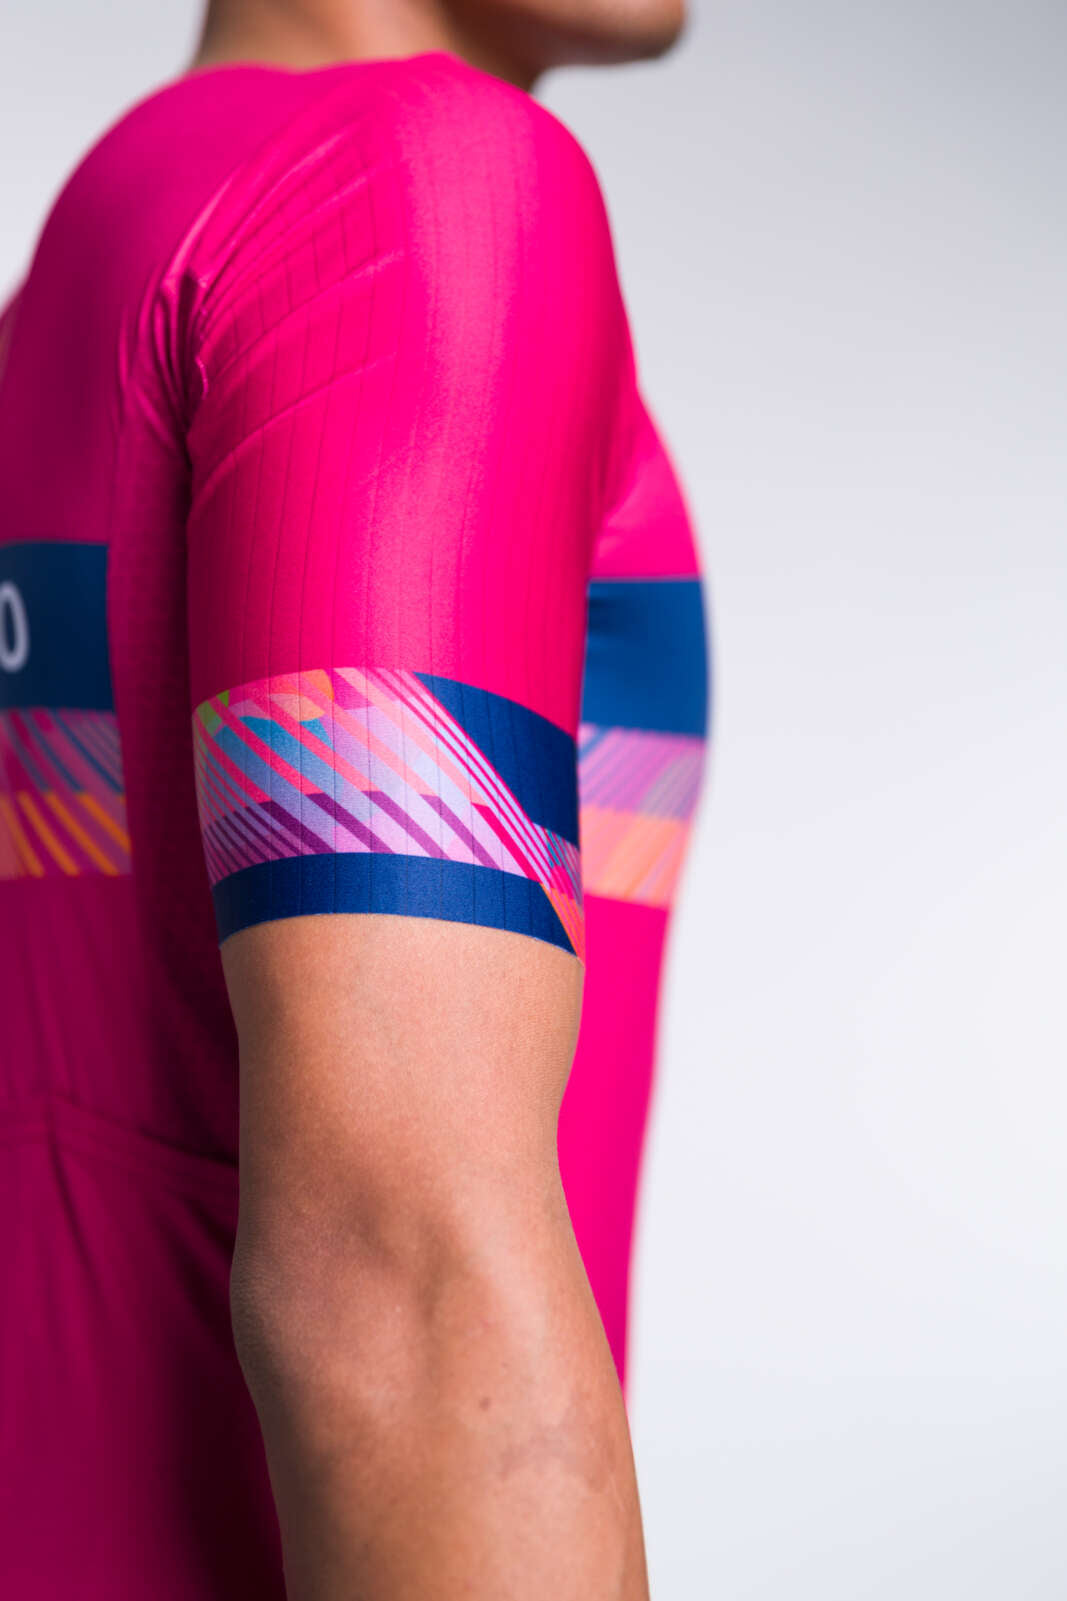 Men's Custom Lightweight Cycling Skinsuit - Flyte Sleeve View #color-options_fully-printed